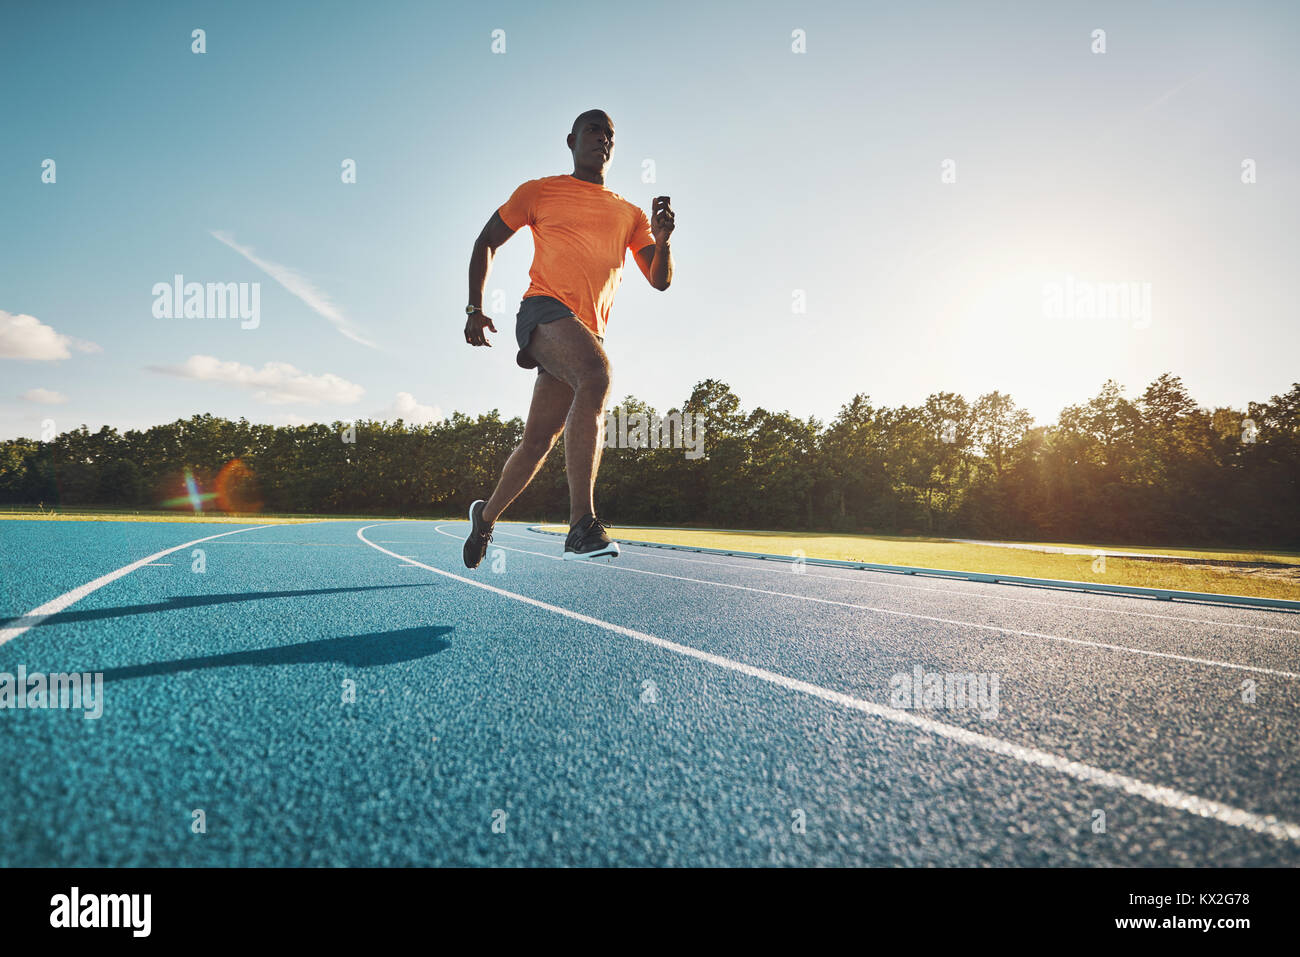 Focused young African runner in sportswear racing alone down a running track on a sunny day Stock Photo